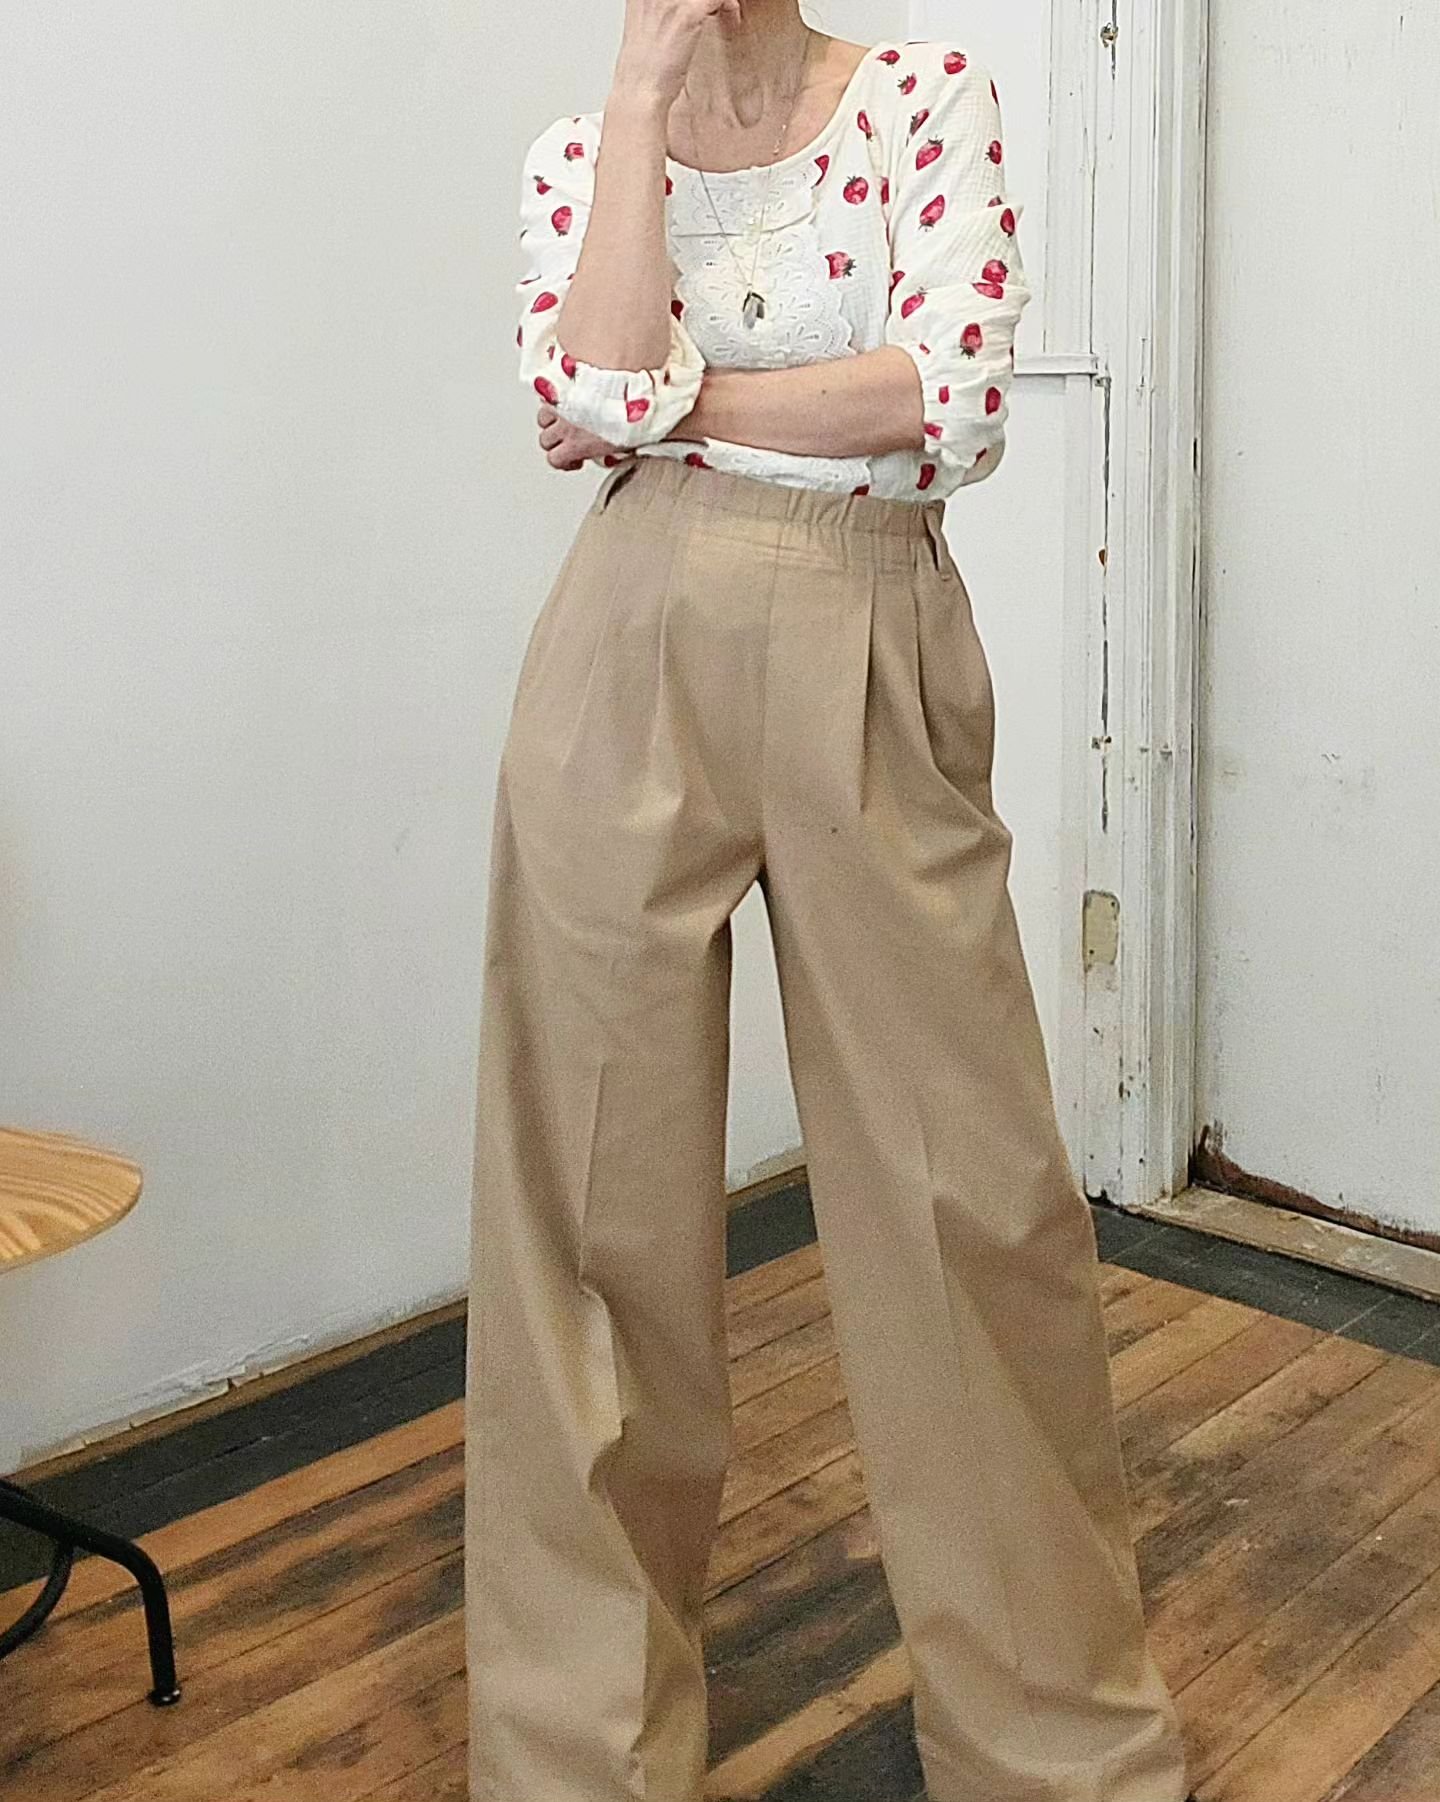 Happy Fri-yay!  Our Orso pant drop is LIVE in the shop!  I couldn't wait + I'll be I a meeting wearing my new favorite pants for most of the day! ;)

Check out our pants in shop at 》 simonesrose.com &amp; let us know if you have any questions! 

X M 